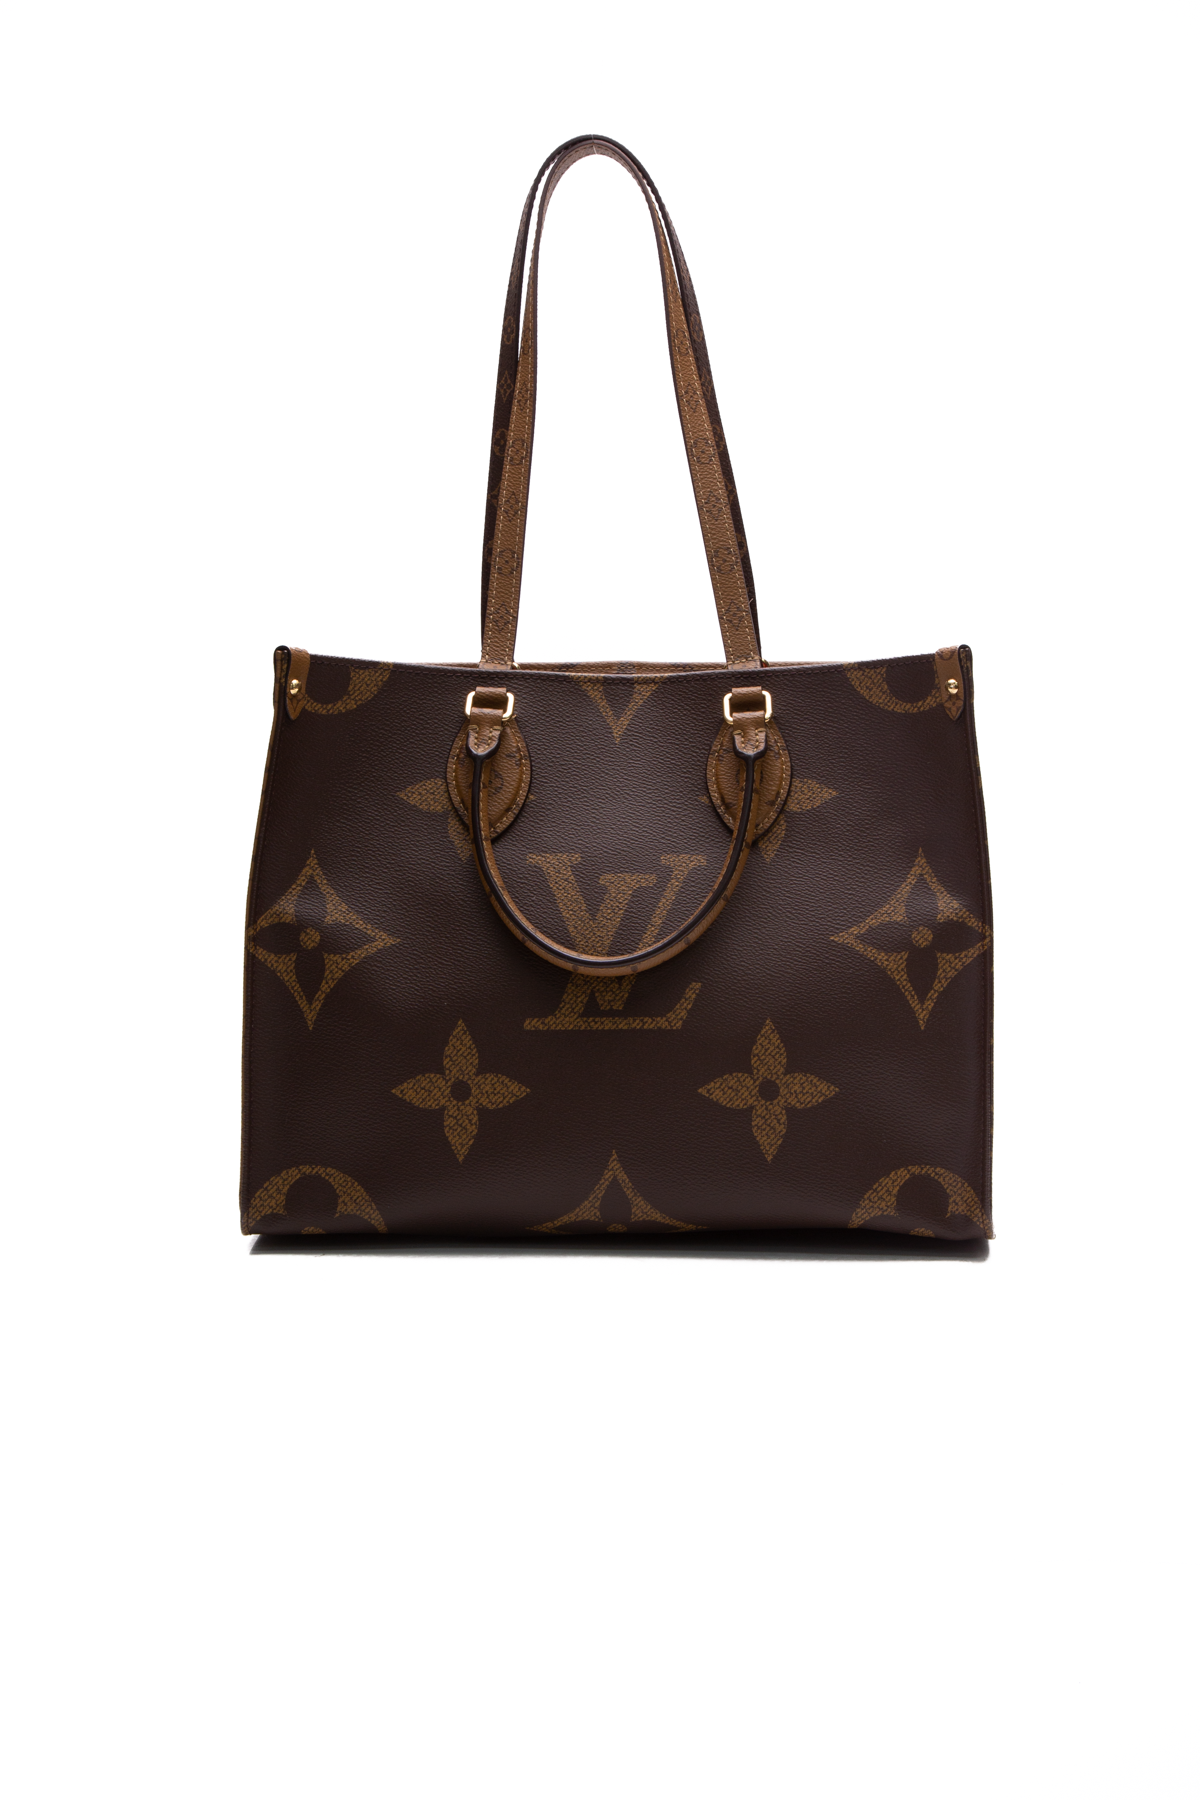 LUXURY* Louis Vuitton CarryAll MM AND I'm returning it 